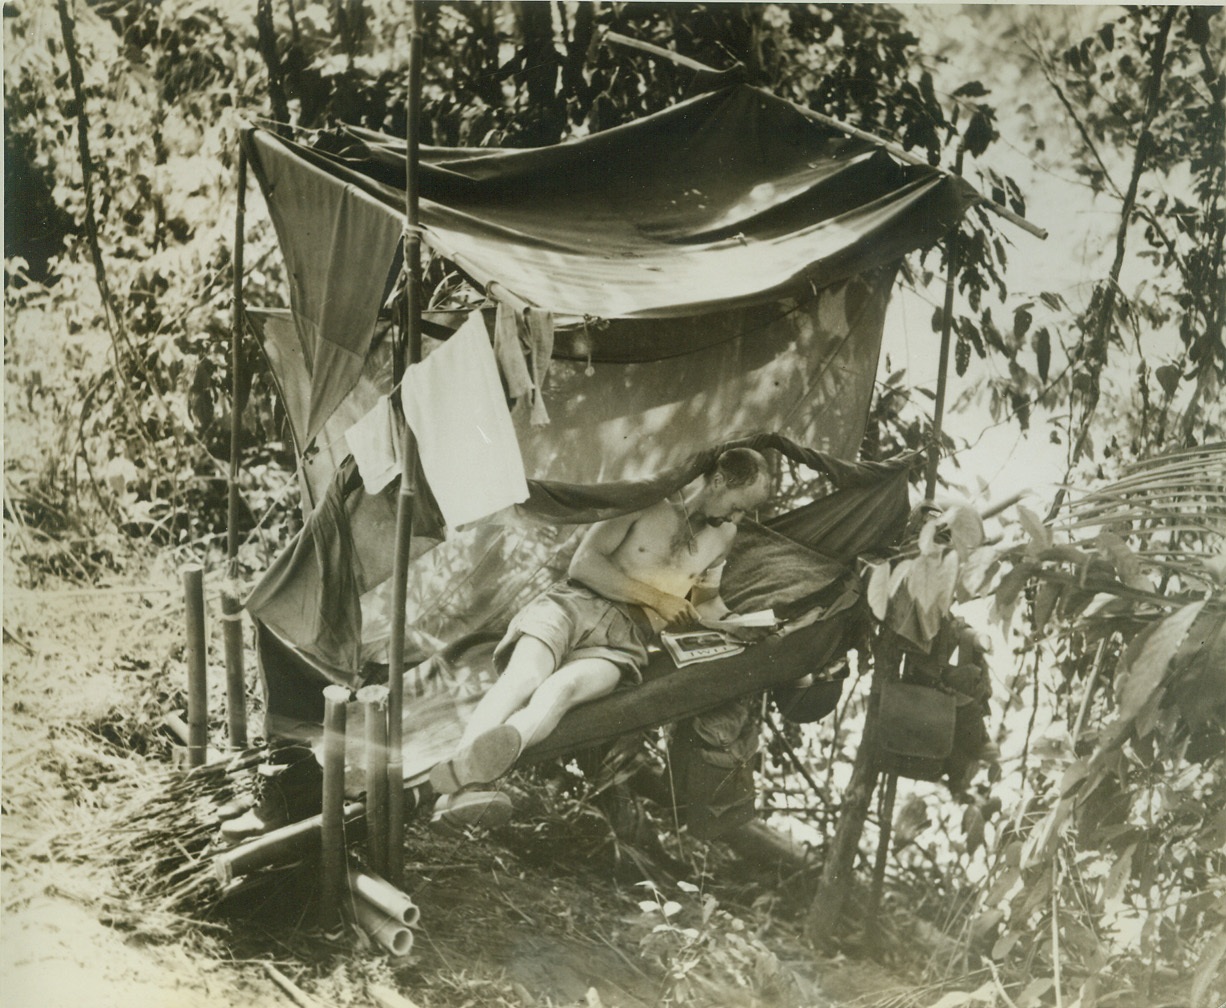 All the Comforts of Home, 11/12/1942. NEW GUINEA -- Americans love their comfort, and wherever they go they're bound to make themselves as comfortable as possible. Corp. Verl Parmee, a member of U.S. Infantry troops in New Guinea, relaxes and reads a letter from home on his unique bed, which he fashioned with bamboo poles.  Credit: (ACME);